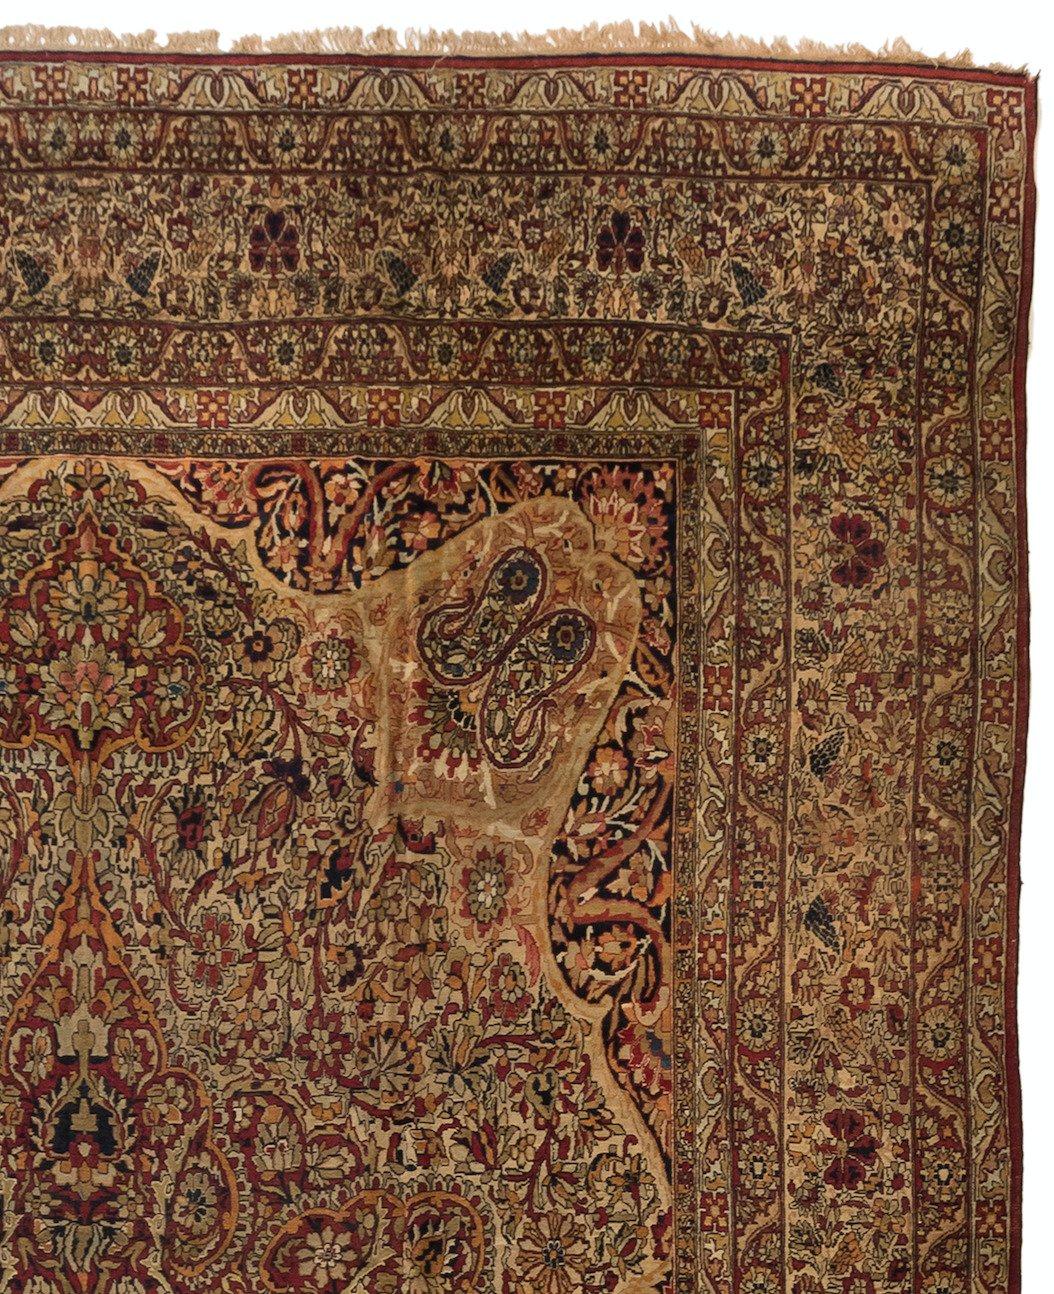 Hand-Knotted Antique Persian Gold Floral Kirman Lavar Rug, circa 1880s-1900s For Sale